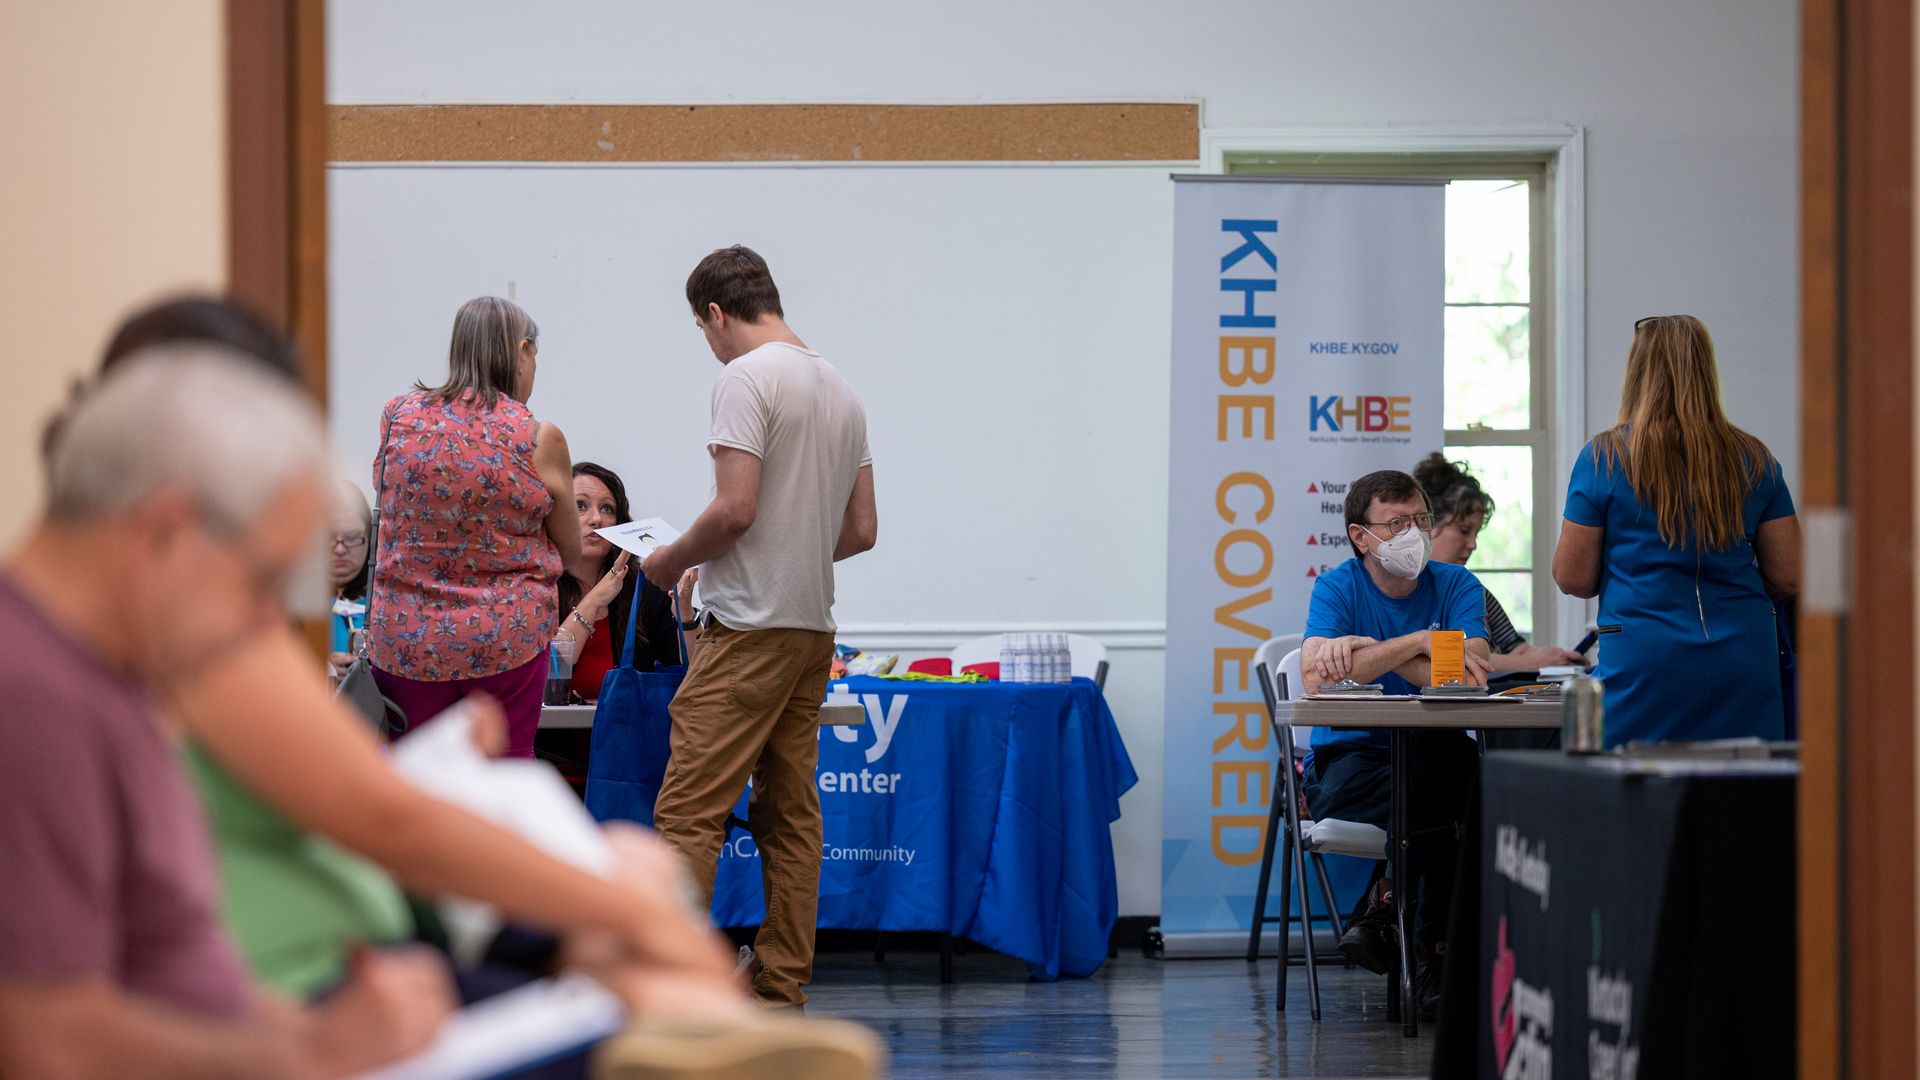 ob seekers speak with hiring representatives during a job fair at a community center in Beattyville, Kentucky, U.S., on Wednesday, July 28, 2021.